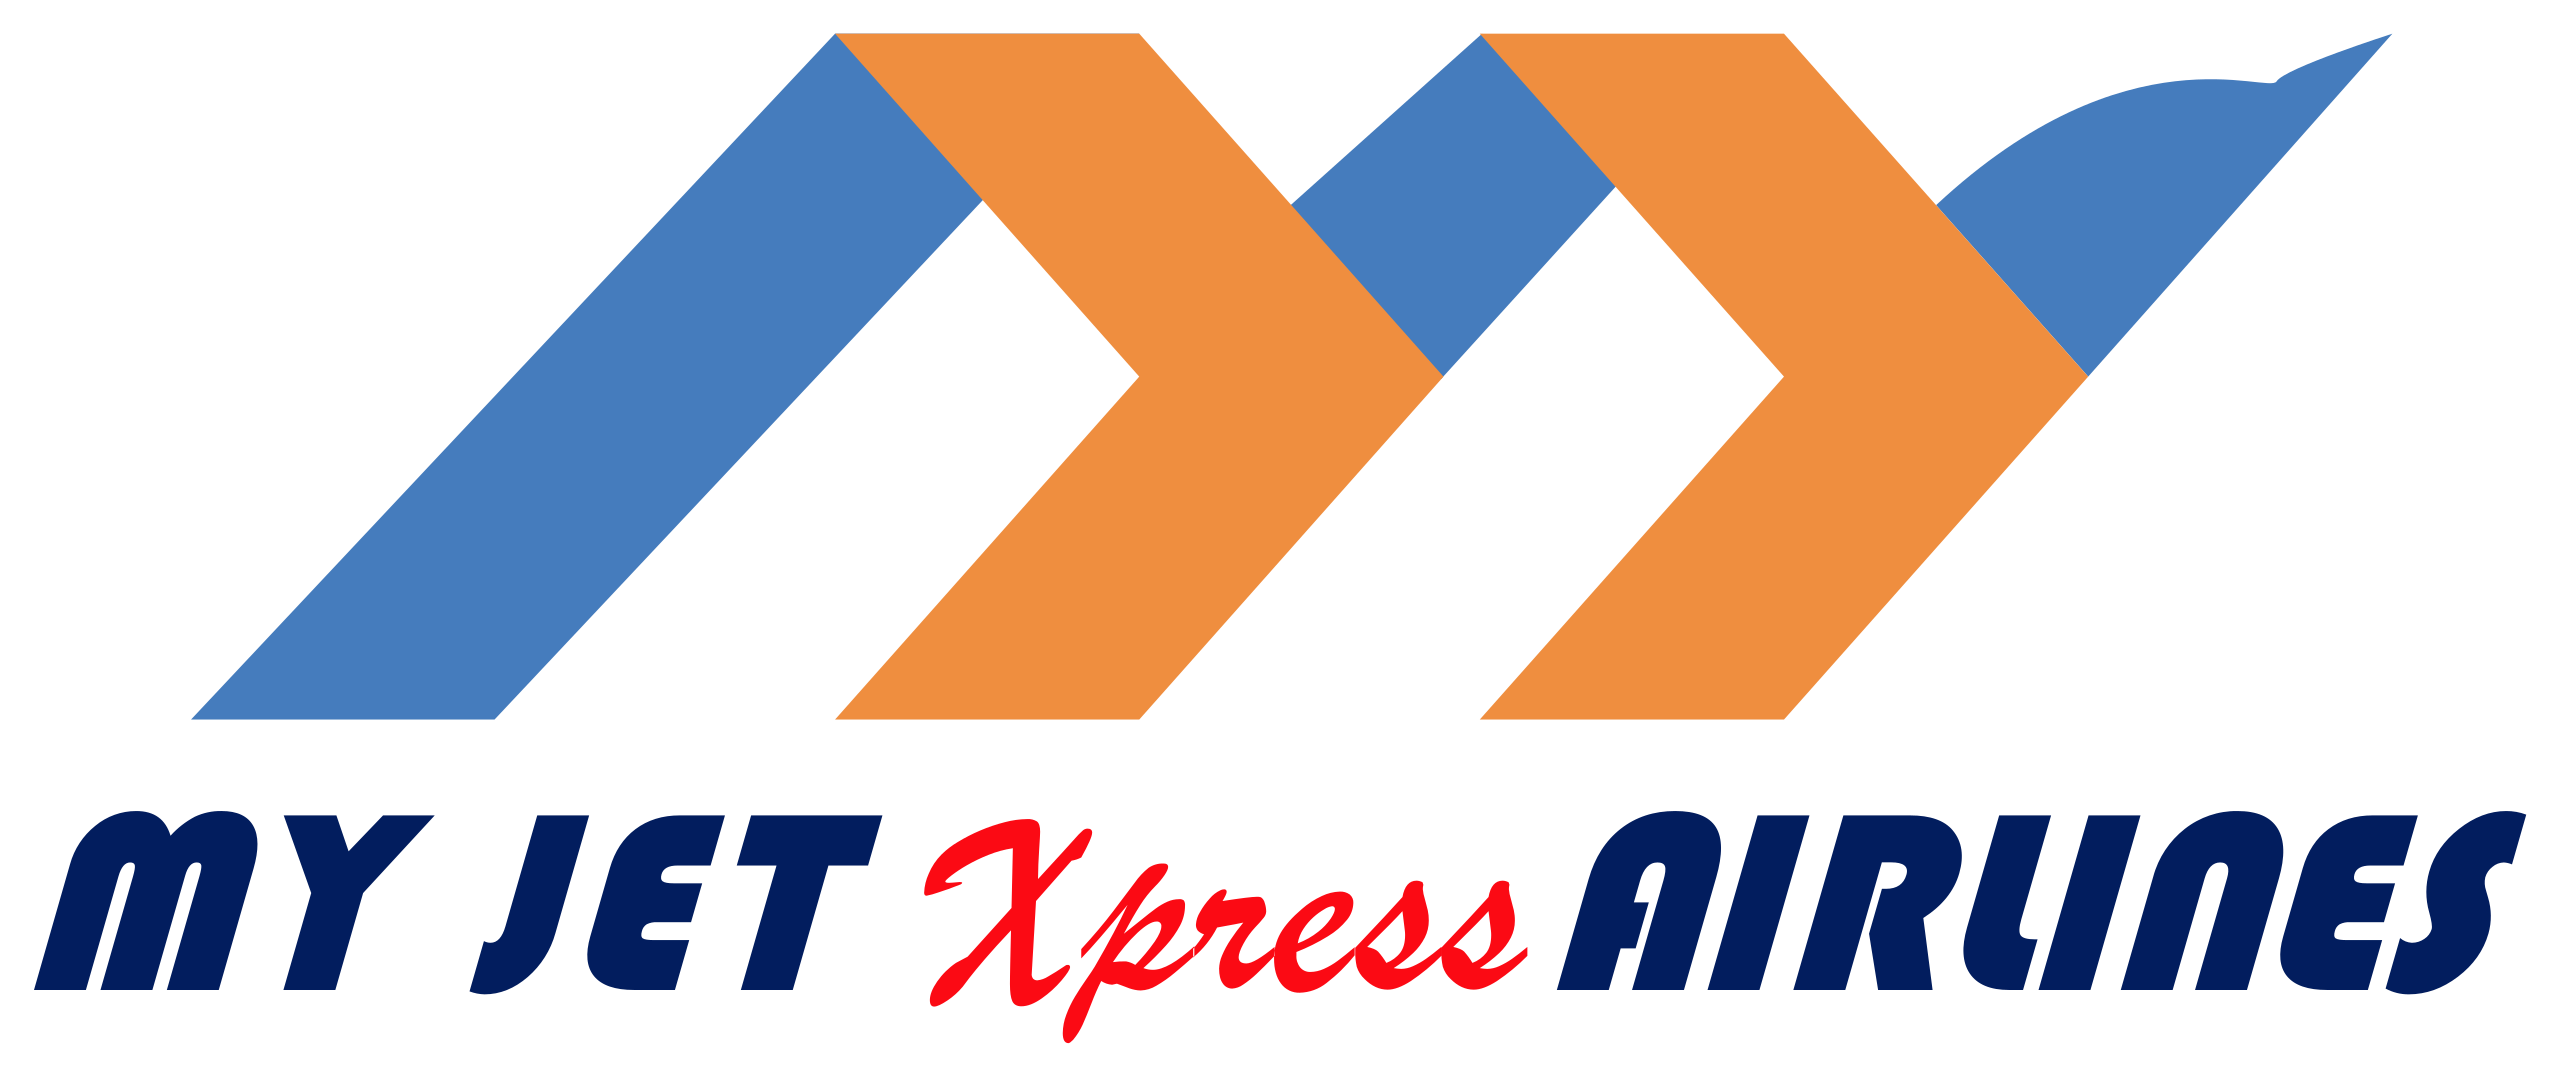 My Jet Xpress Airlines